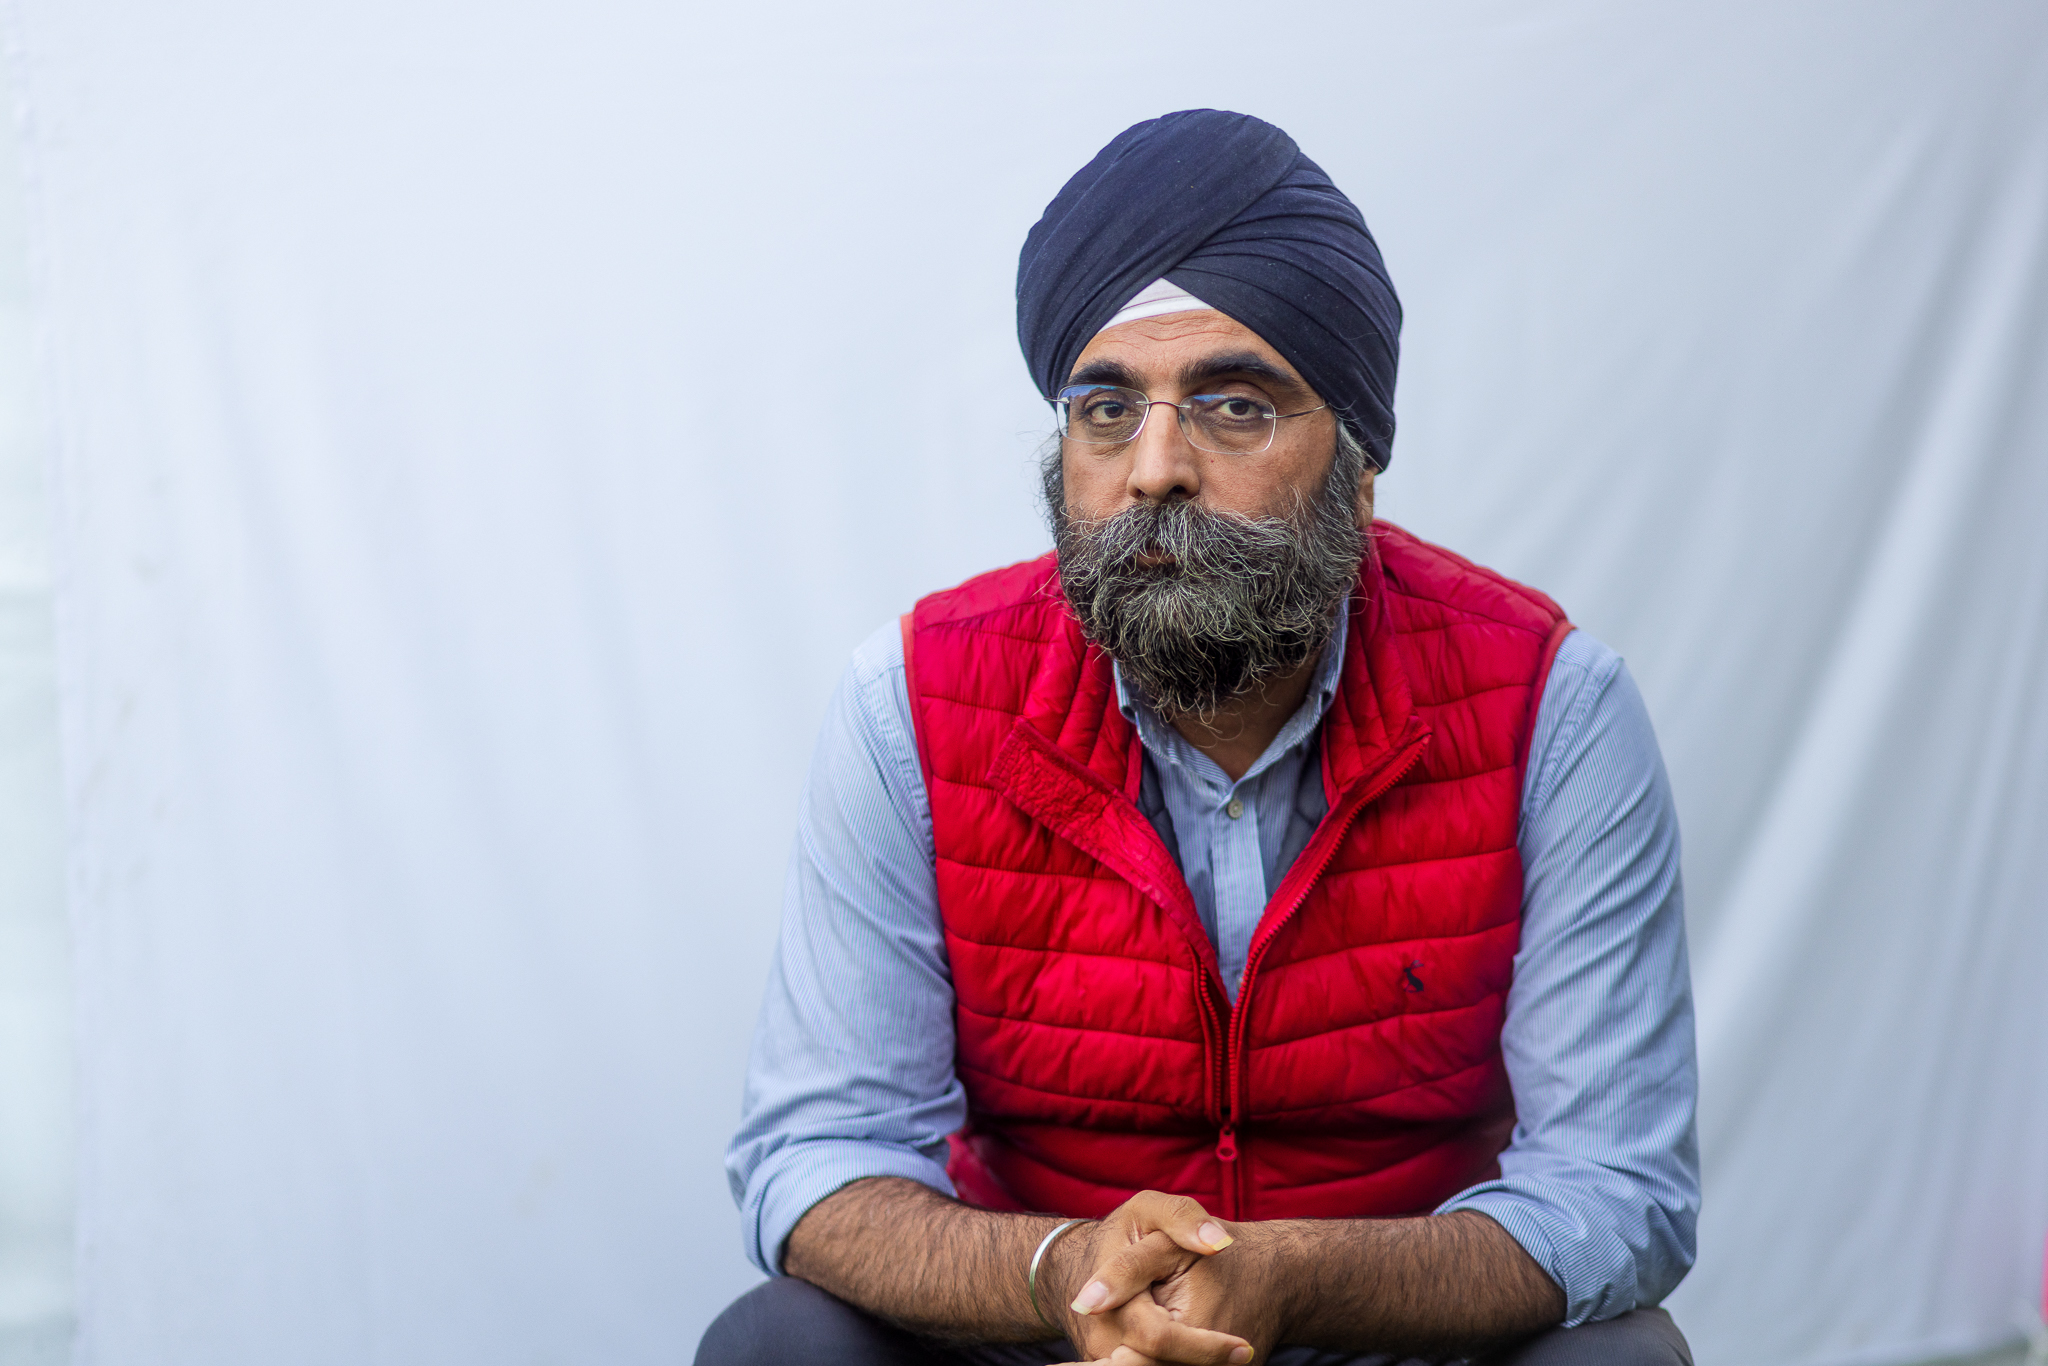 A Sikh man with a blue turban, red puffy vest, and blue button up shirt sits with hands clasped.